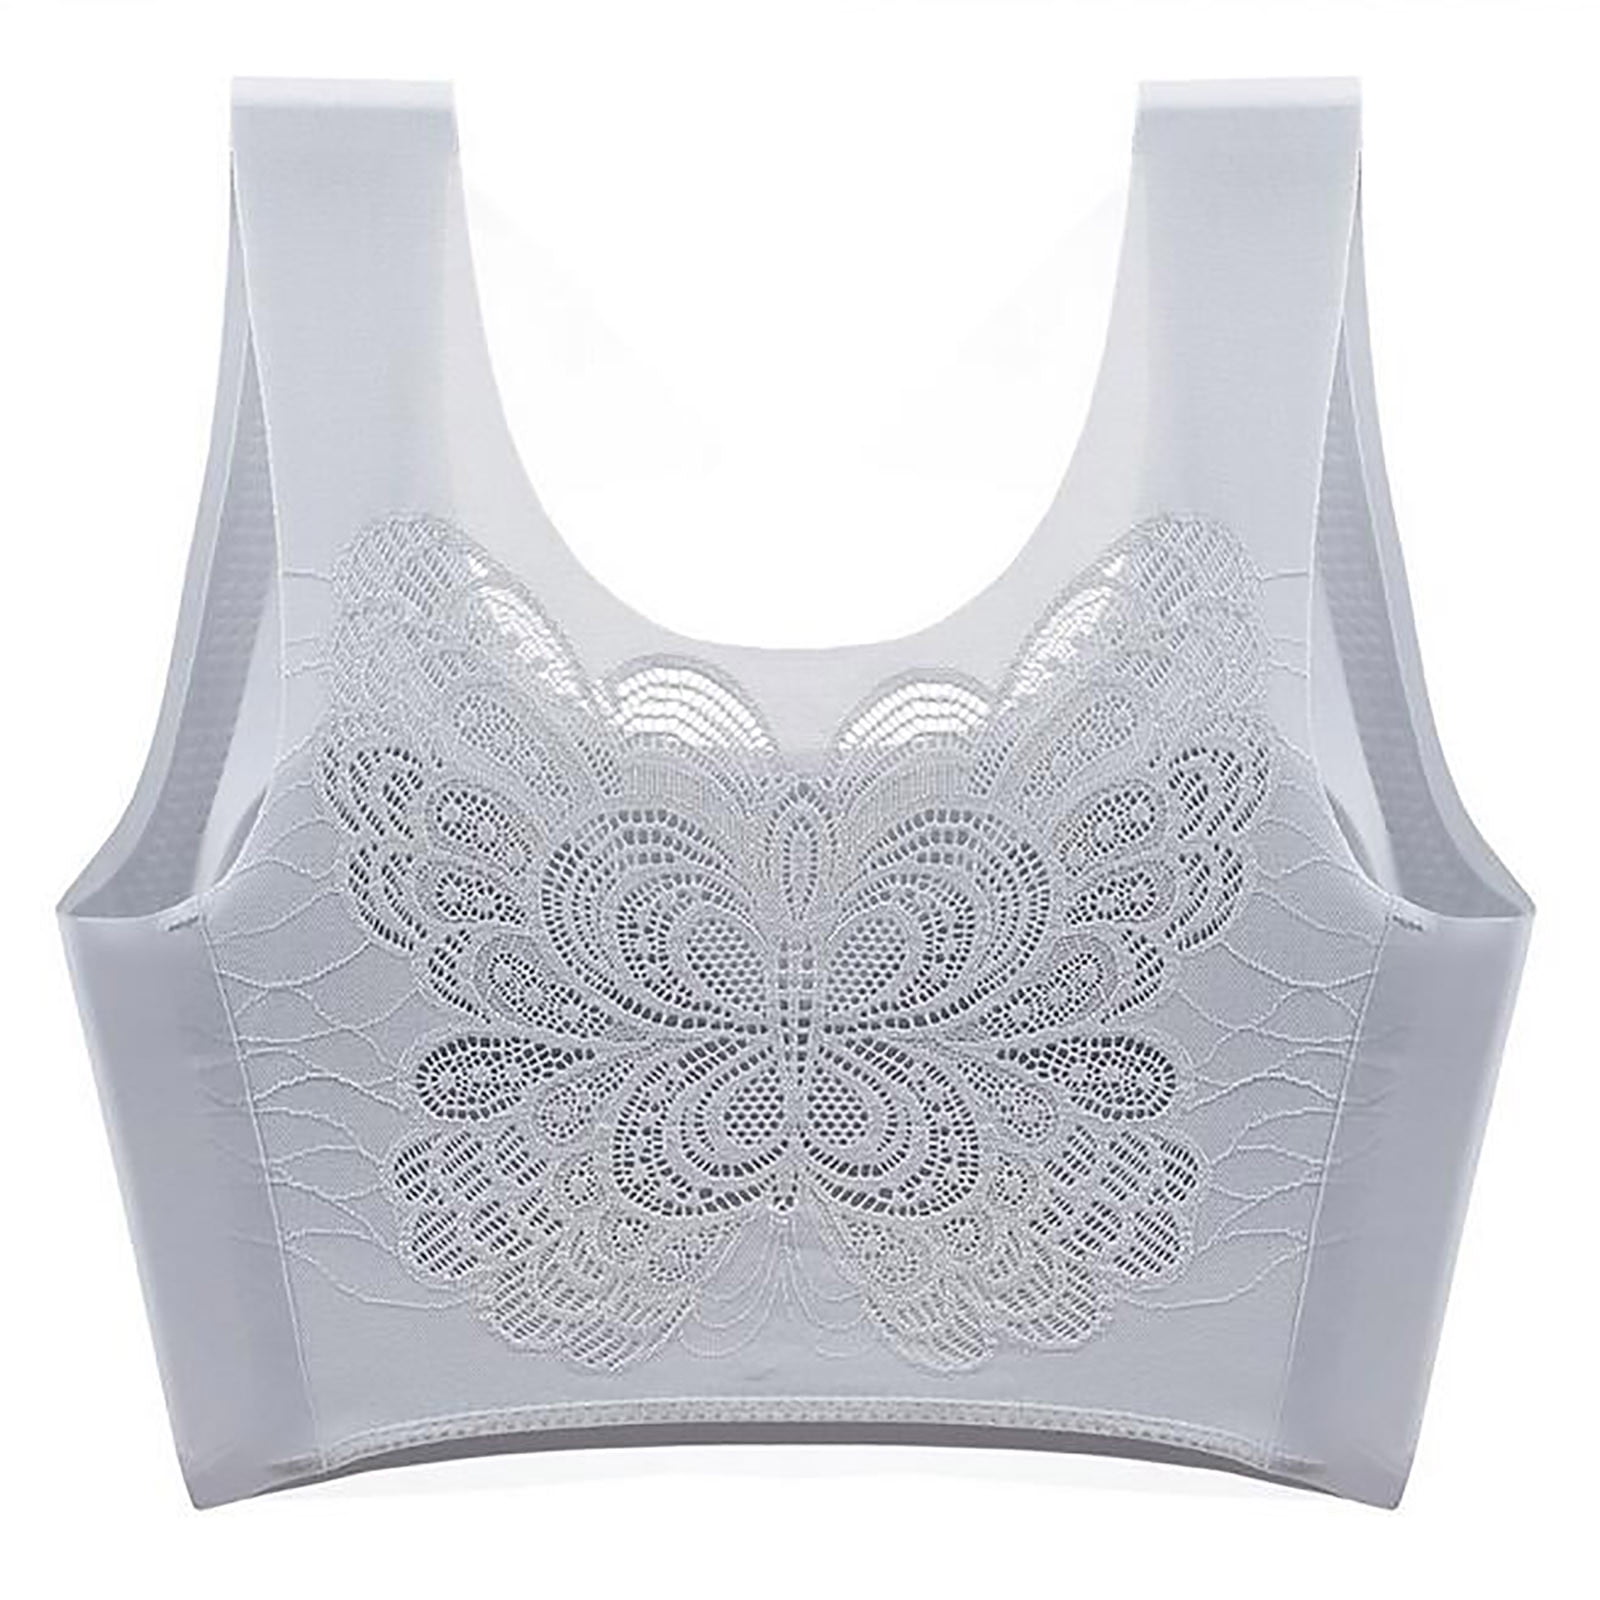 Seamless Padded Riza Sports Bra For Women Ideal For Yoga, Pilates